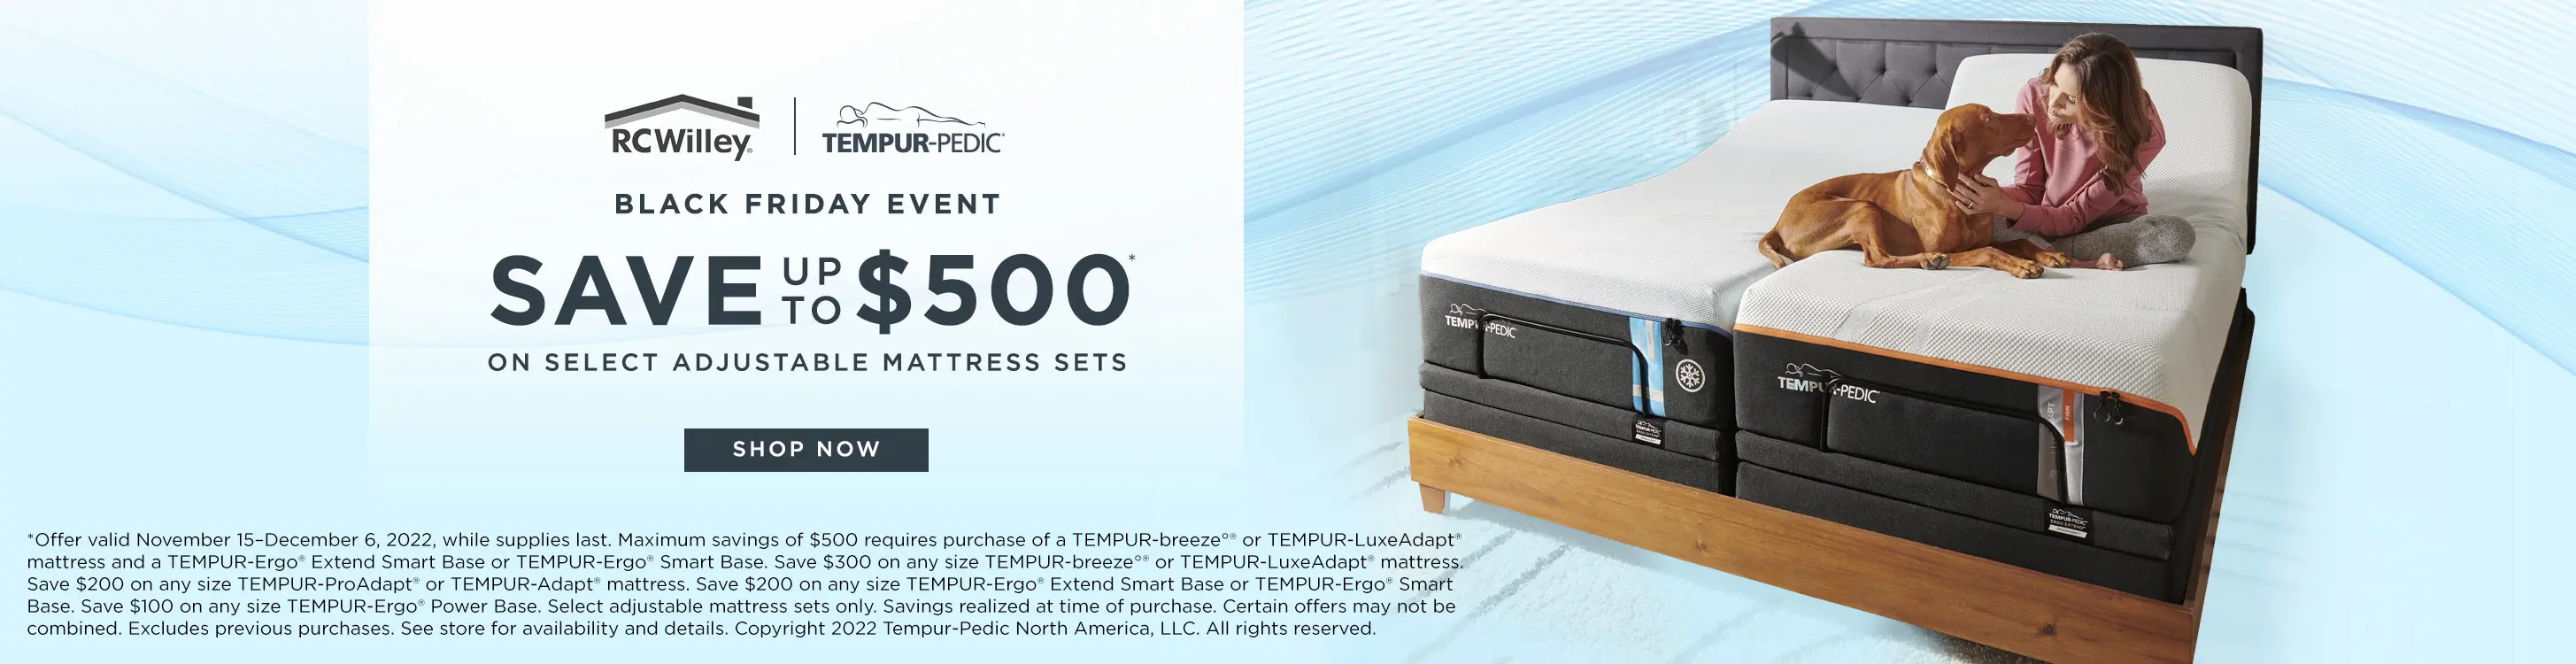 Save up to $500 on select Tempur-Pedic adjustable mattress sets. Offer Valid November 15th to December 6th.